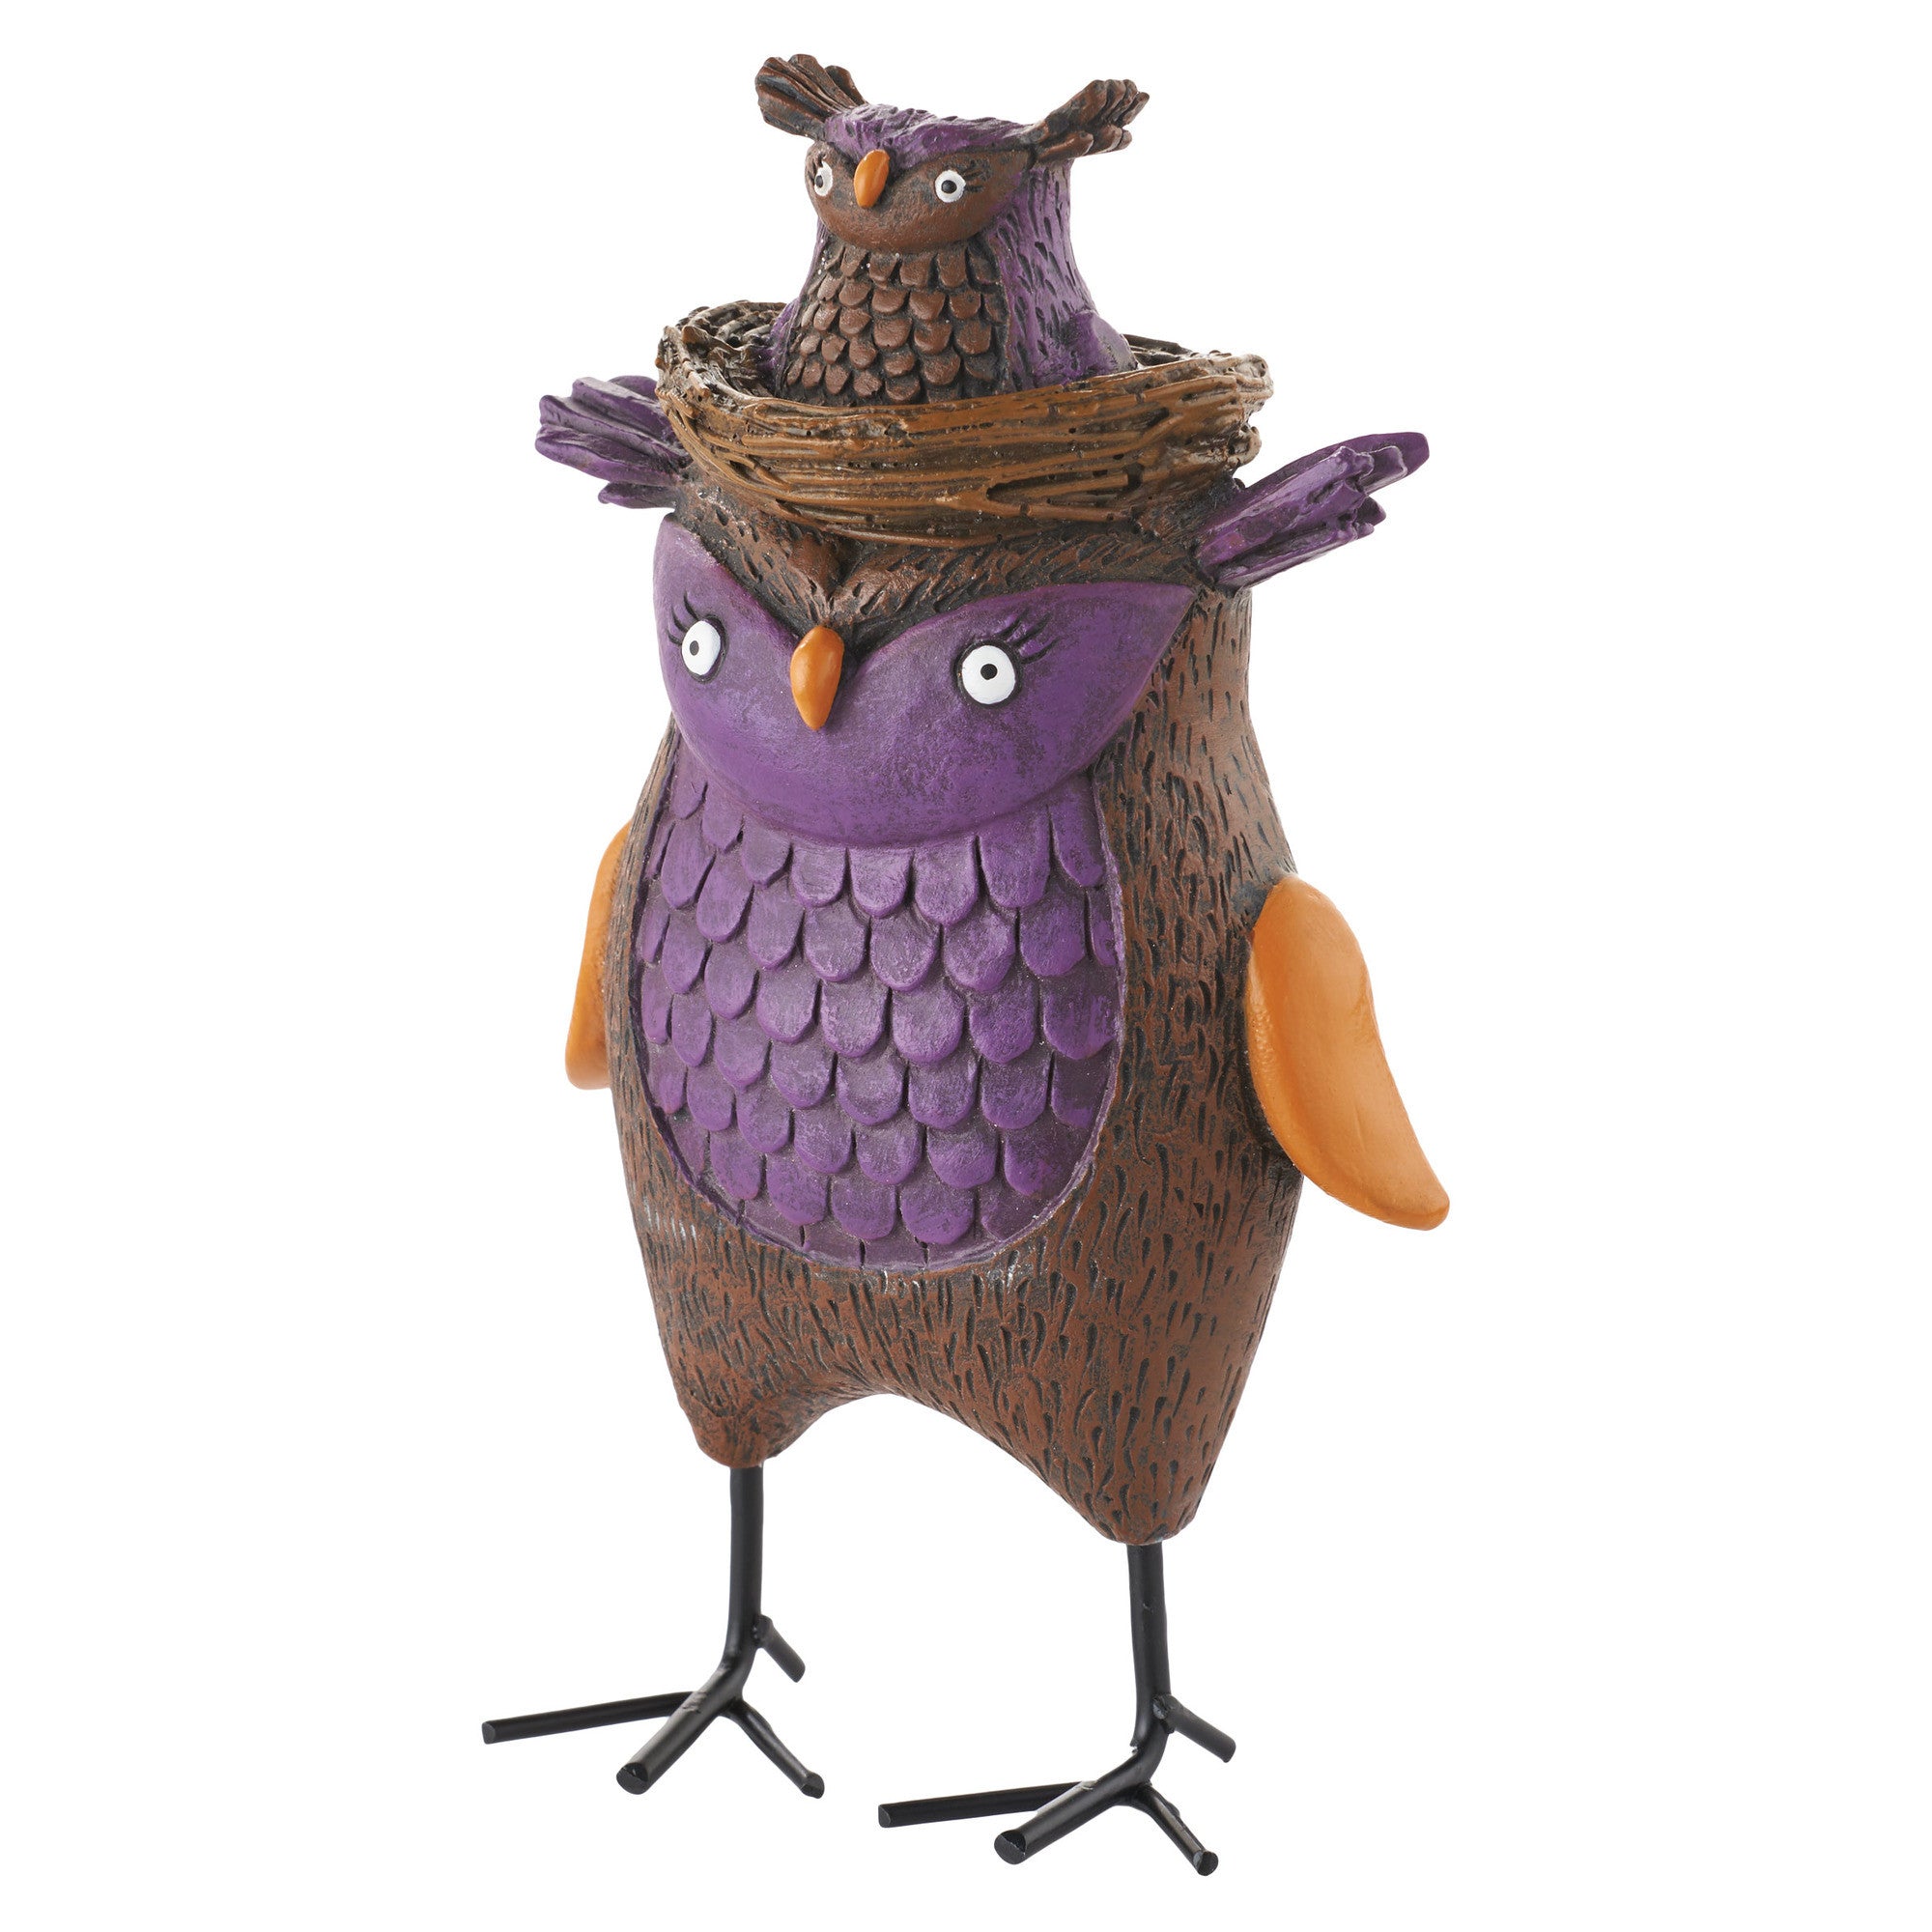 Hoot & Holler Owl Figurine by Department 56